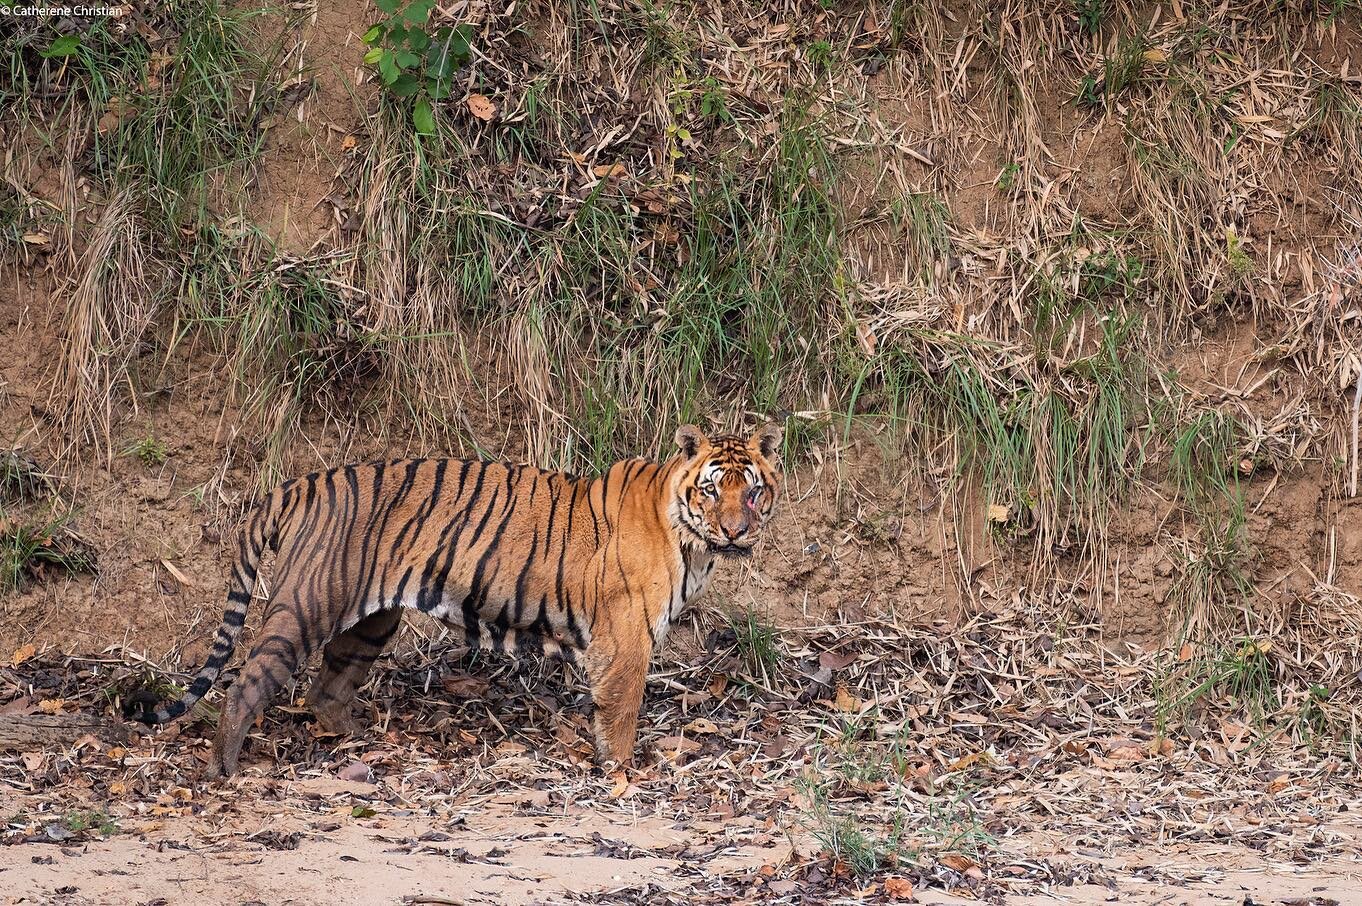 An EXTRAORDINARY sighting by @rajangurung3 @aaisa_gurung @catherene.christian and Karan on the walking trail this evening!! Not only the thrill of suddenly finding yourself on foot in the immediate presence of a large male tiger BUT the astounding re